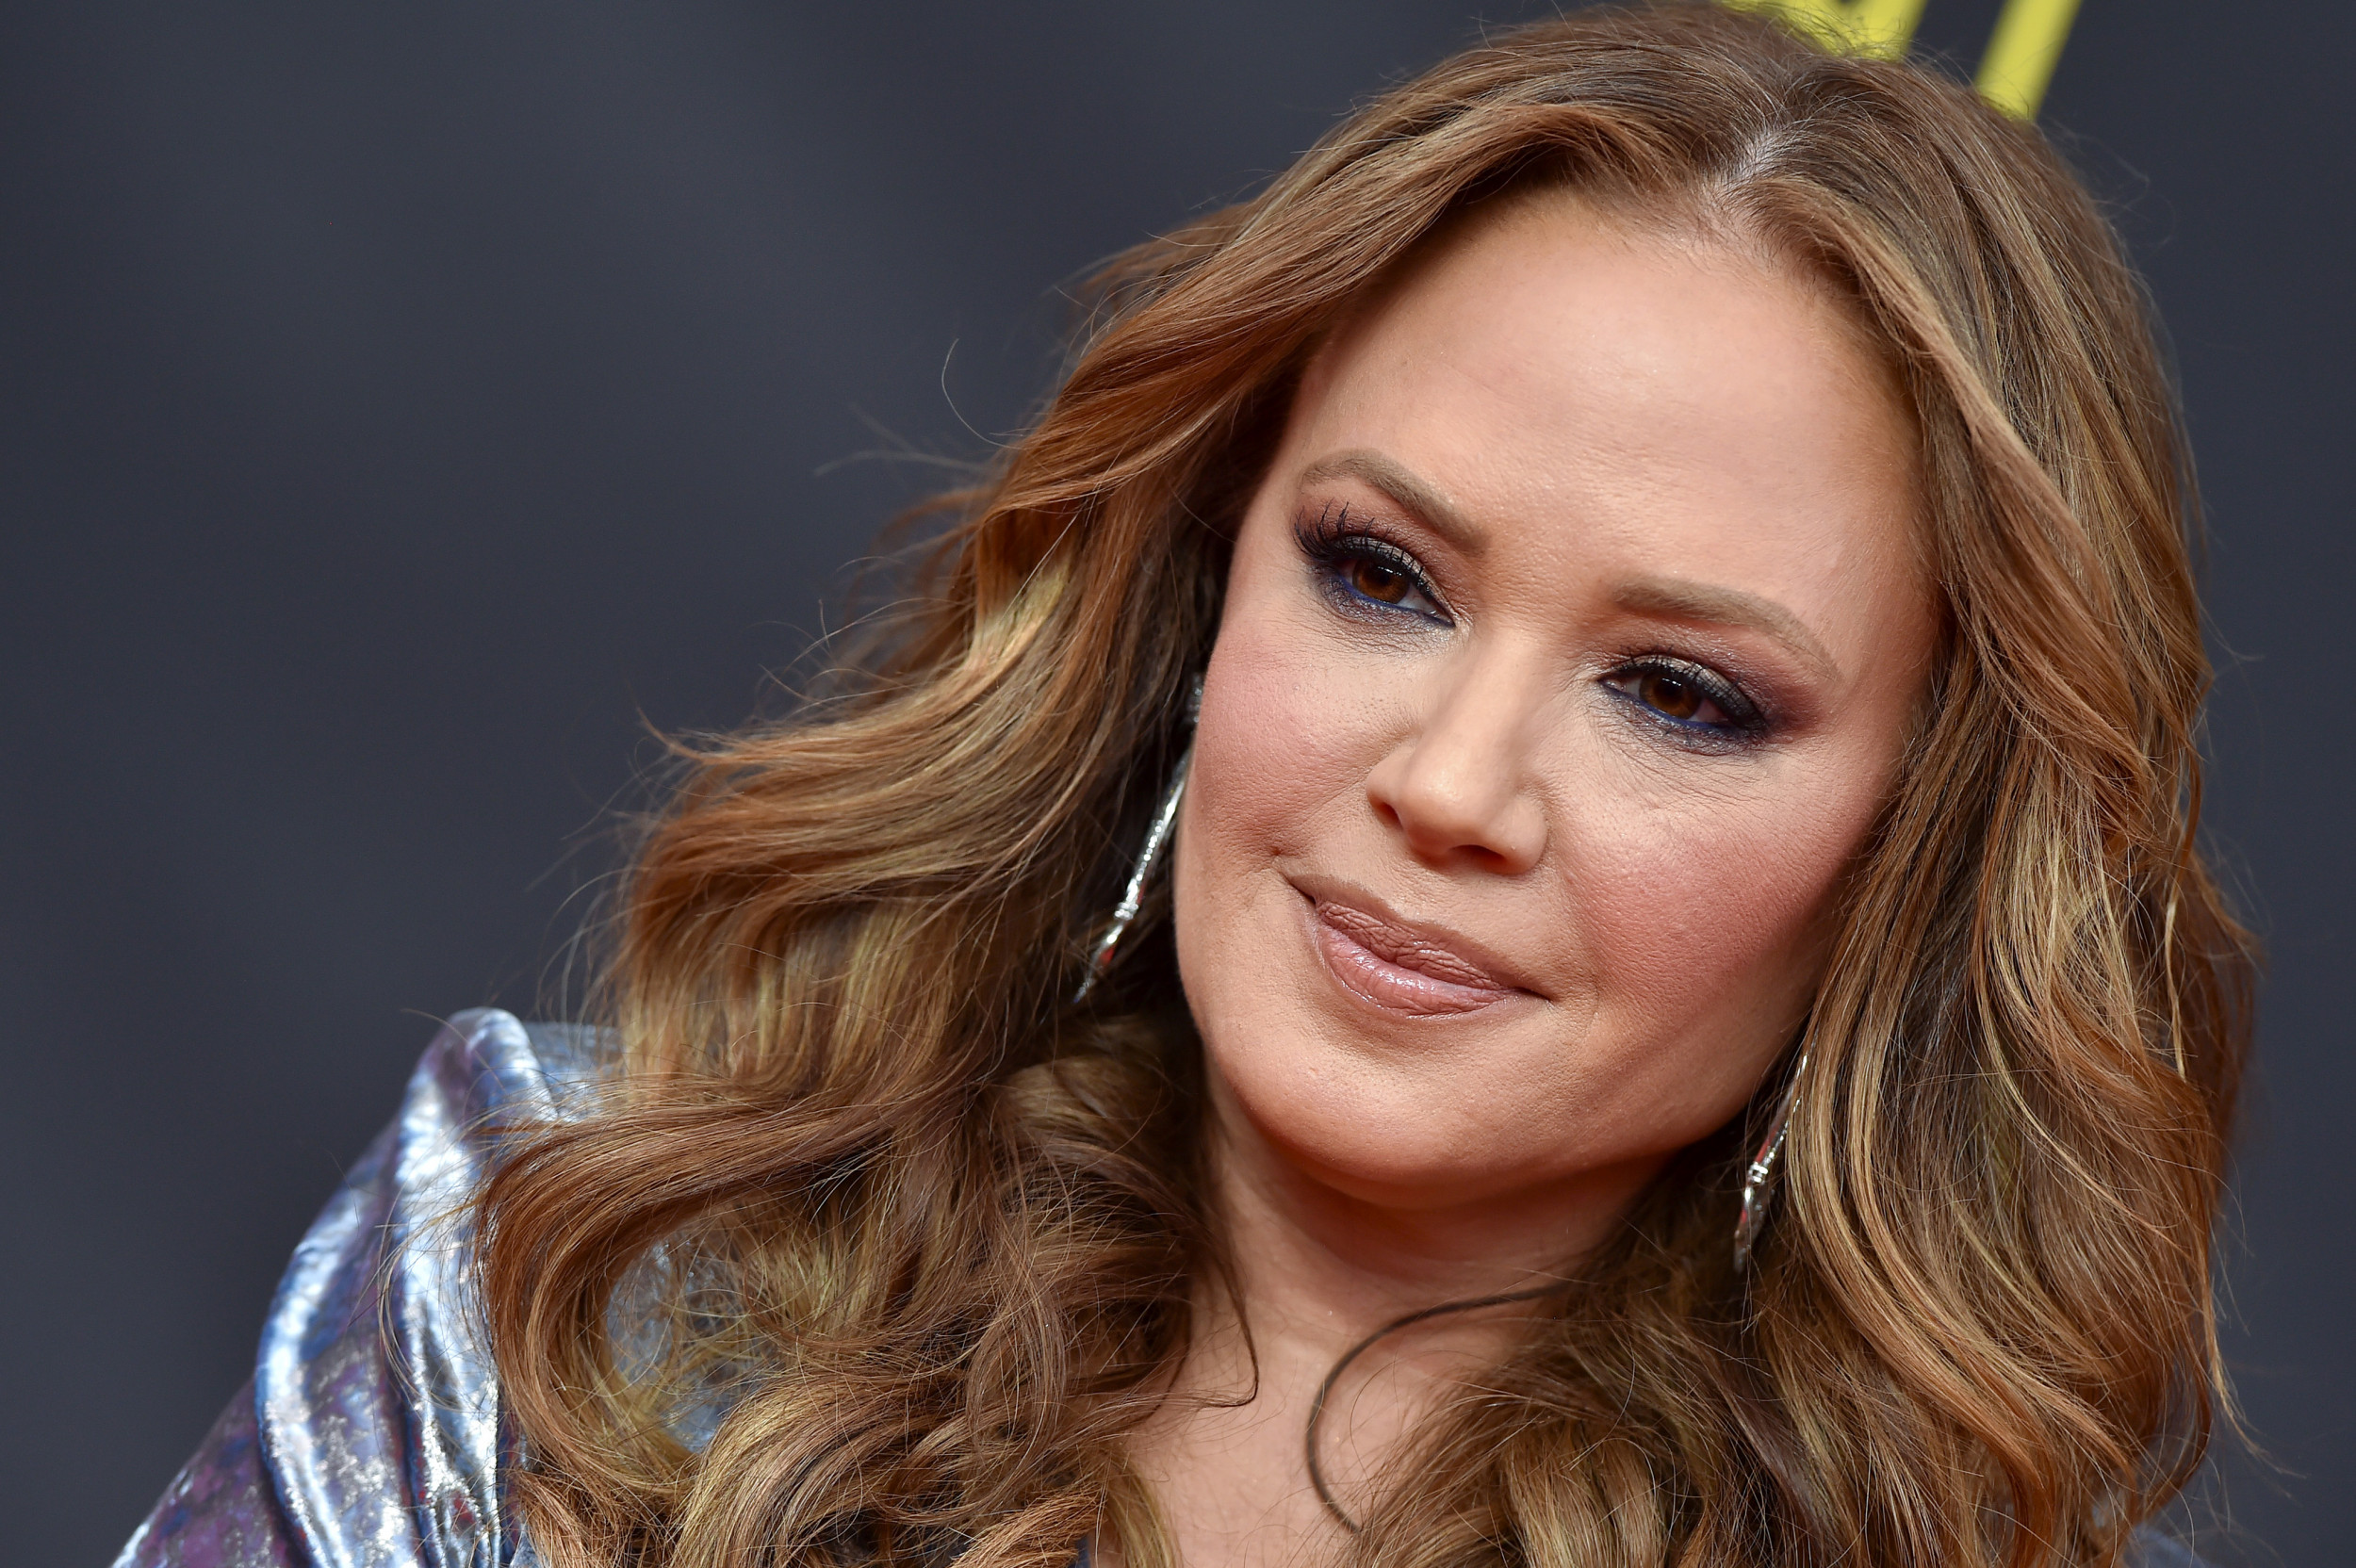 What the Church of Scientology Has Said About Leah Remini's Netflix Sh...